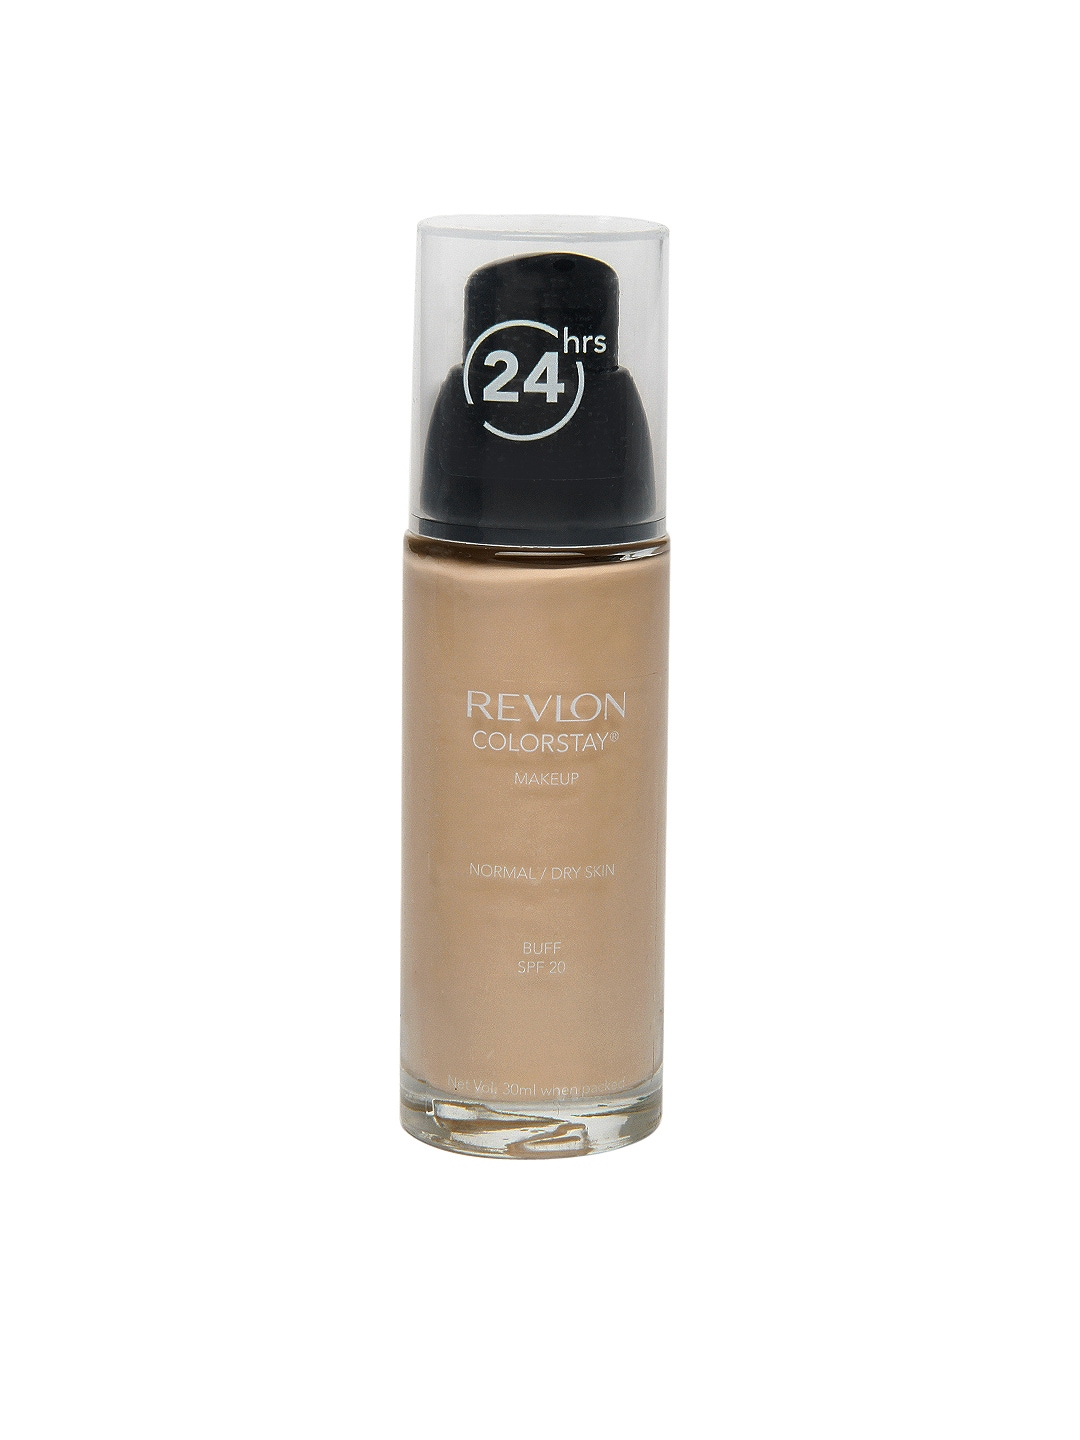 Revlon Colorstay Make Up Normal To Dry SPF 20 - Natural Tan Price in India